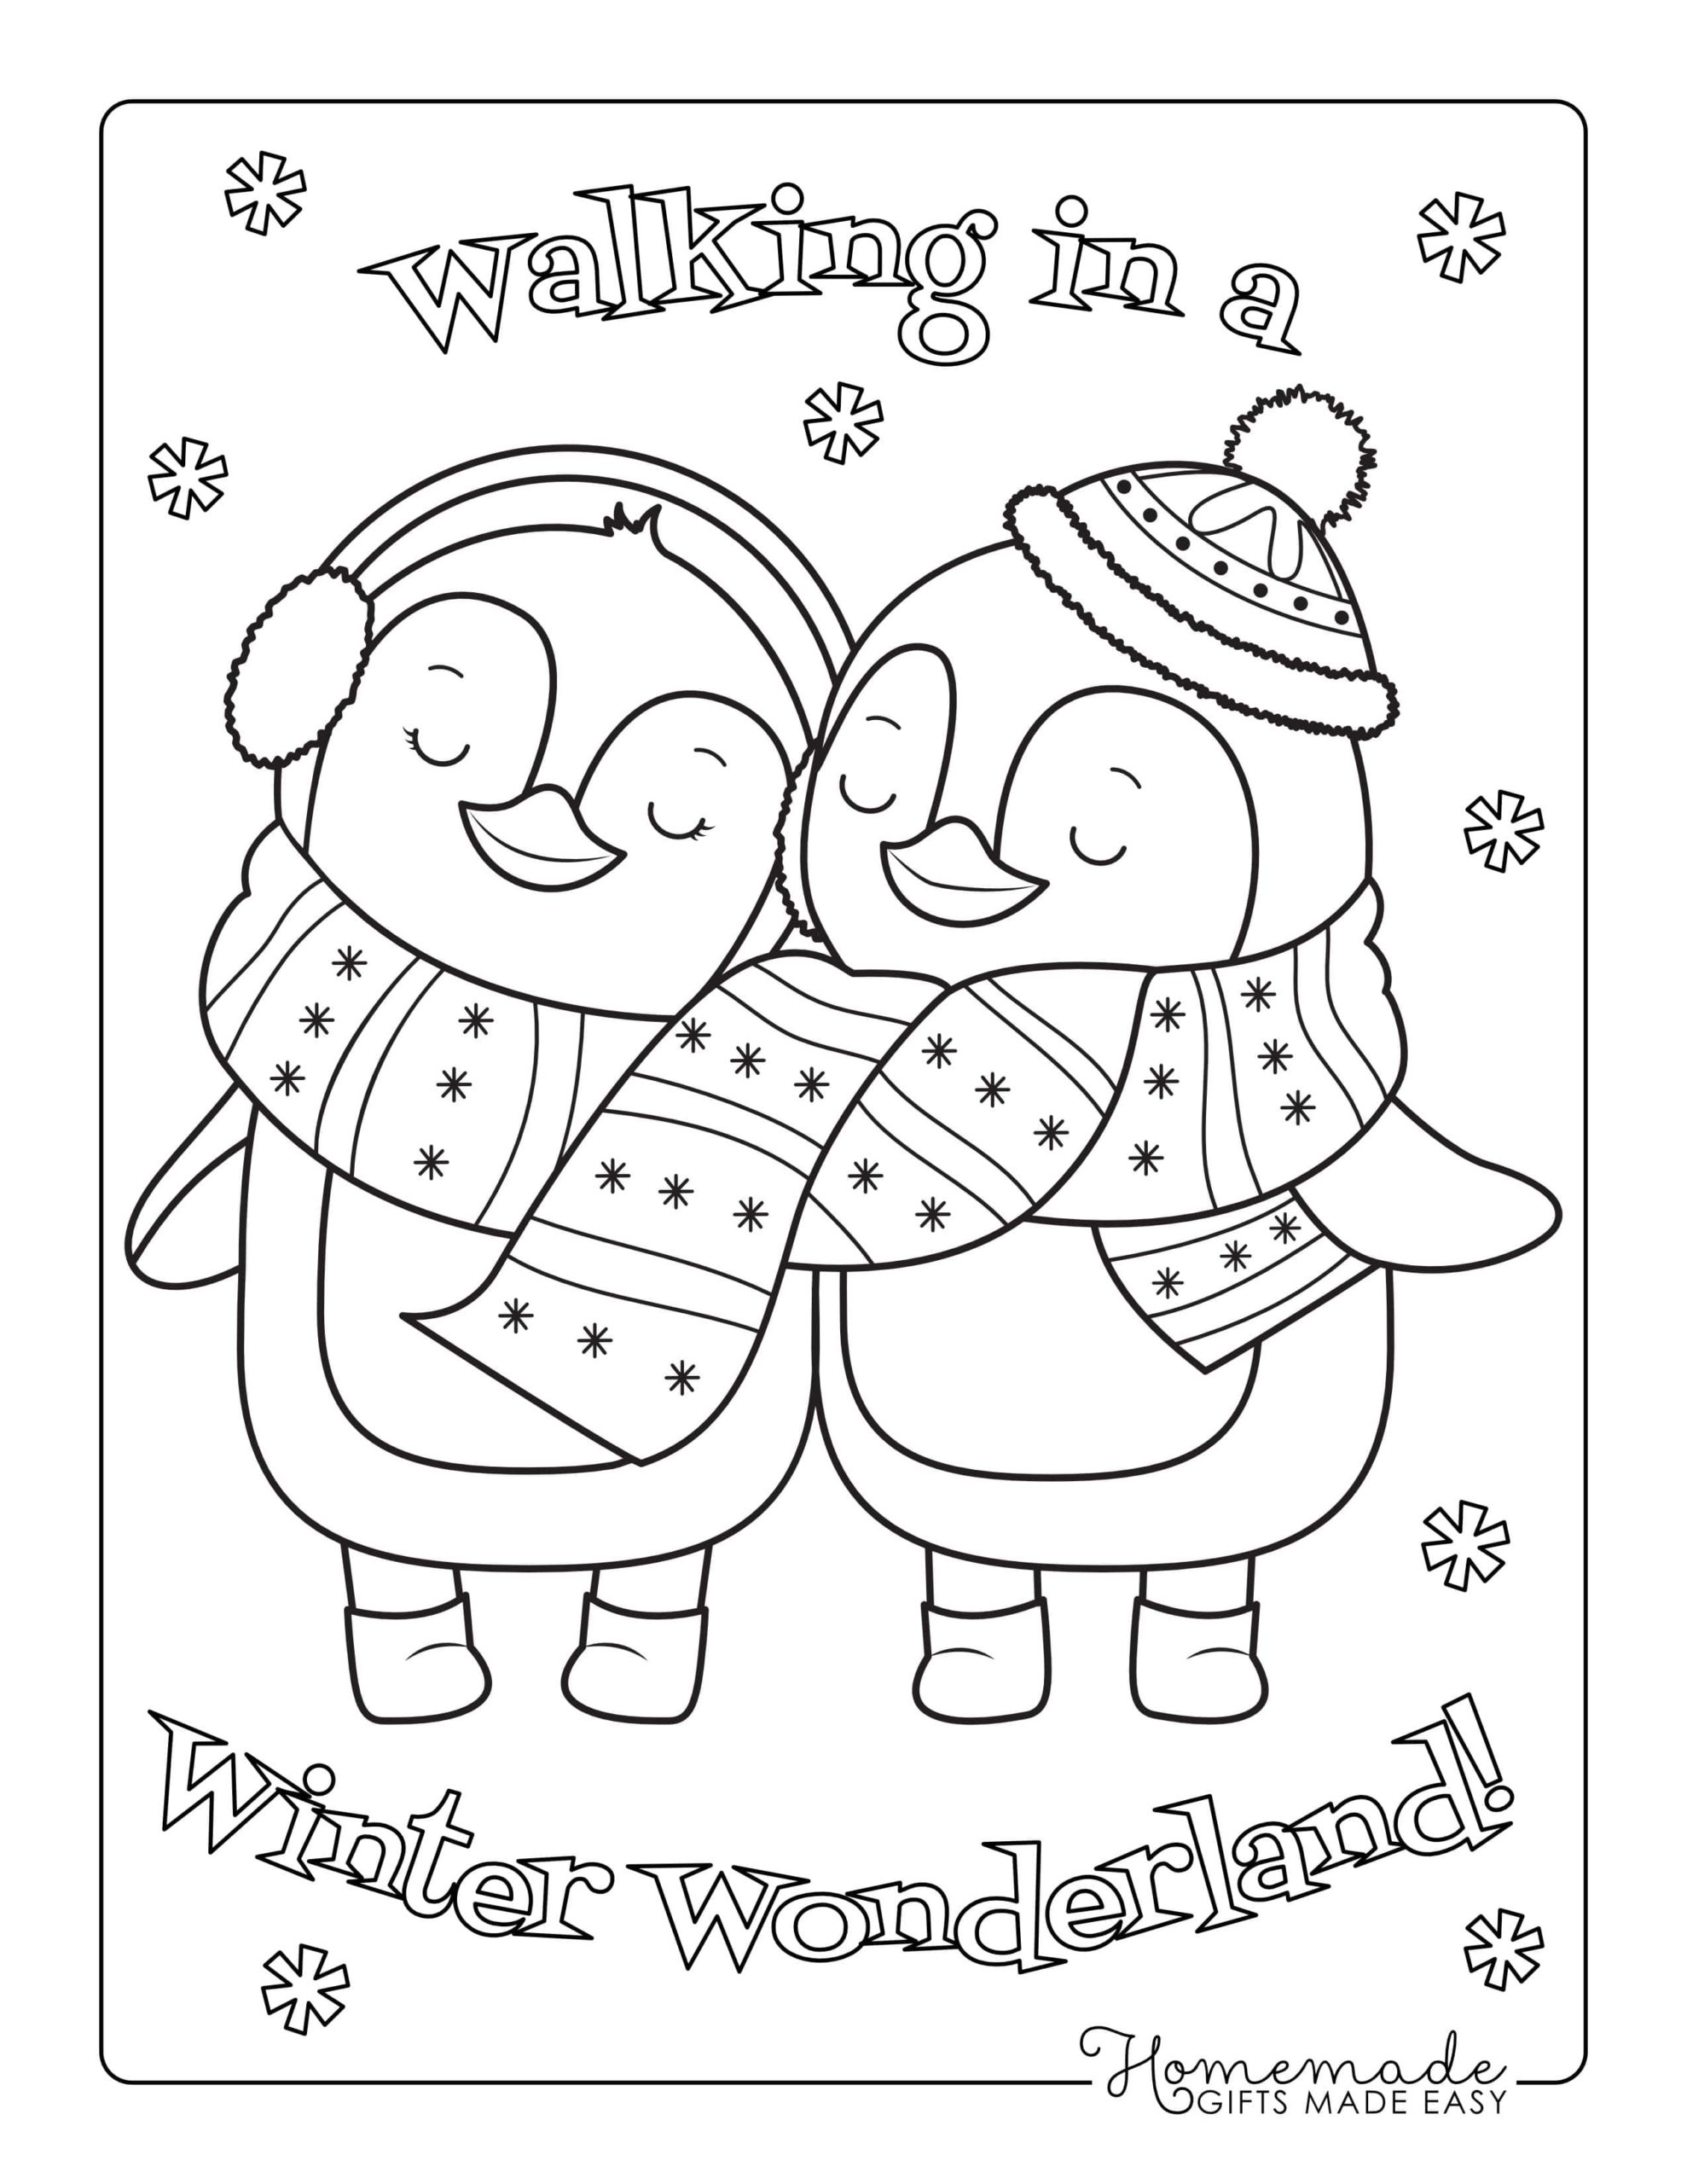 Nice Little Town 7 adult Coloring Book, Coloring Pages PDF, Coloring Pages  Printable, for Stress Relieving, for Relaxation 